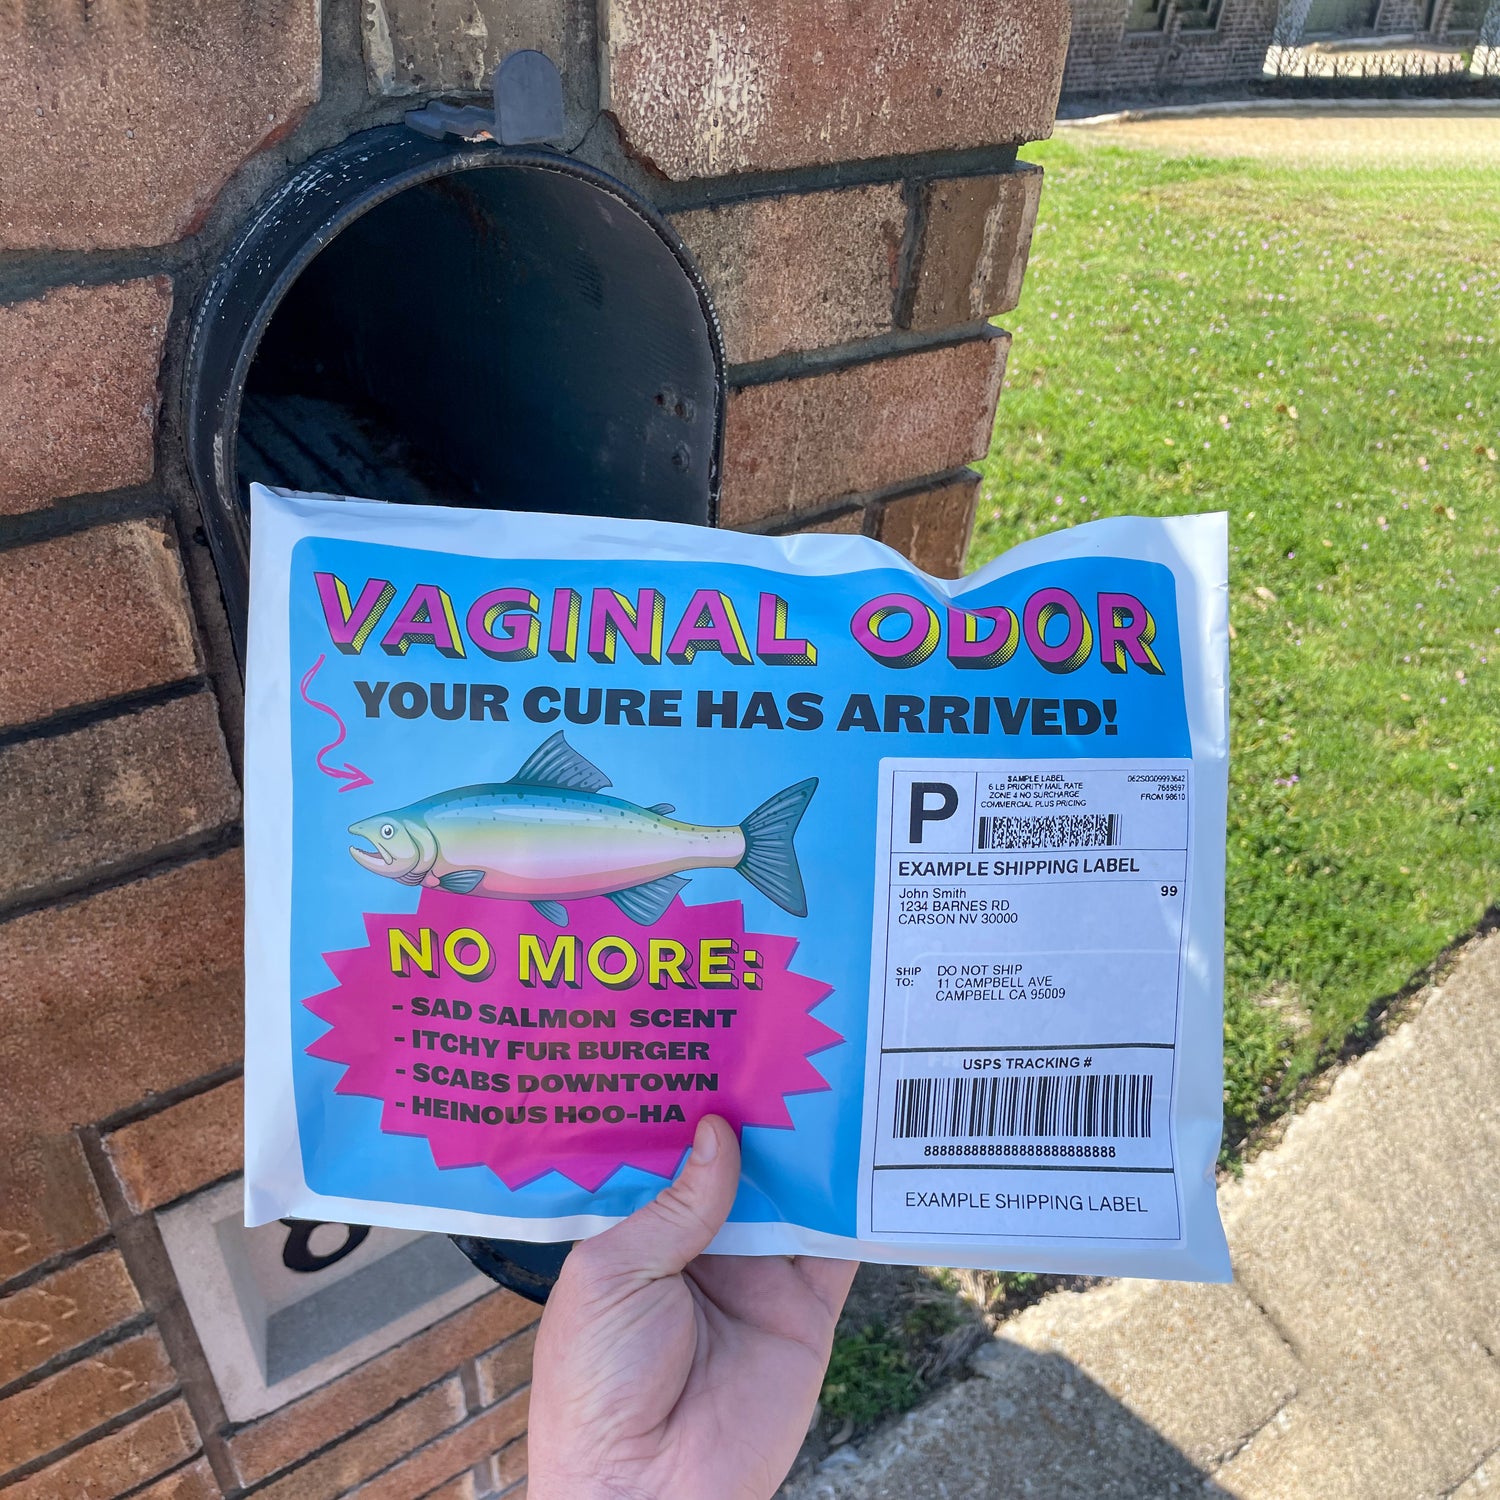 POV of a prank recipient opening their mailbox to find a vibrant blue and pink prank package with huge text that says, "VAGINAL ODOR - YOUR CURE HAS ARRIVED!"